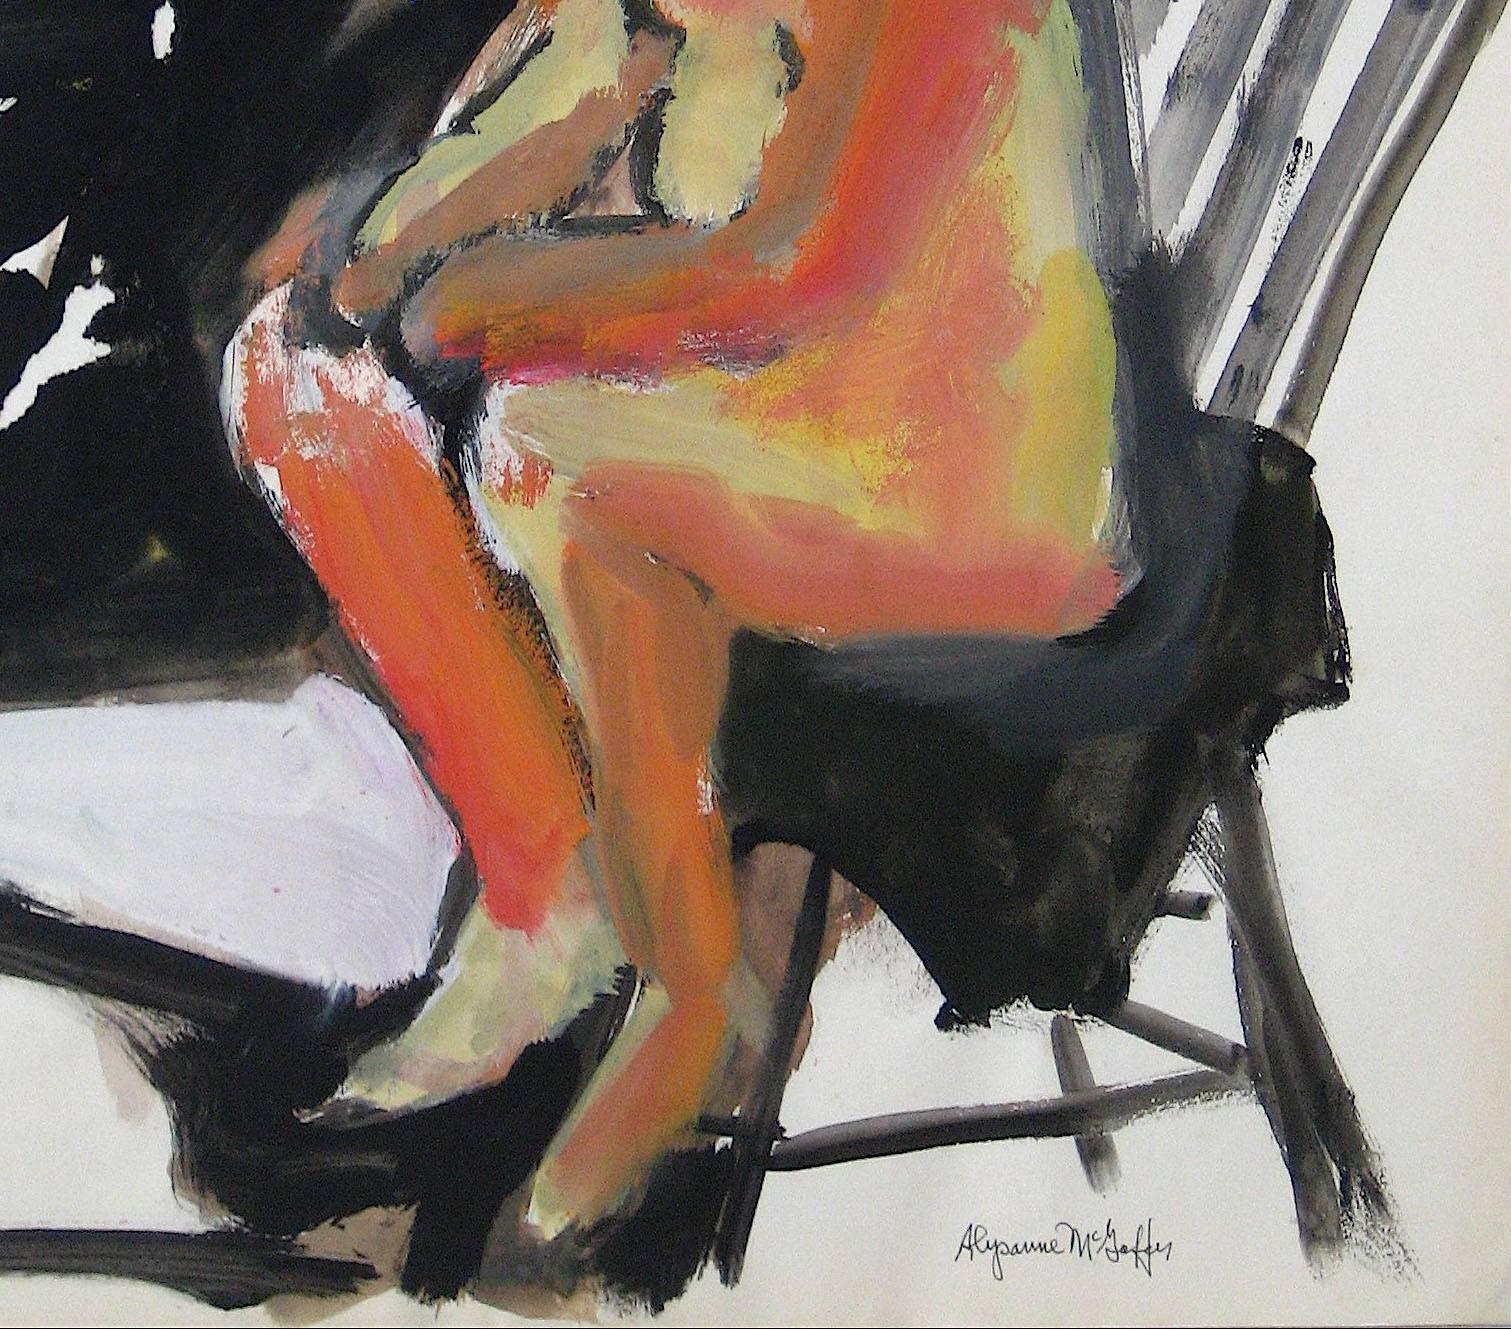 Bay Area Figurative Seated Nude in Warm Tones, Circa 1960s - Painting by Alysanne McGaffey